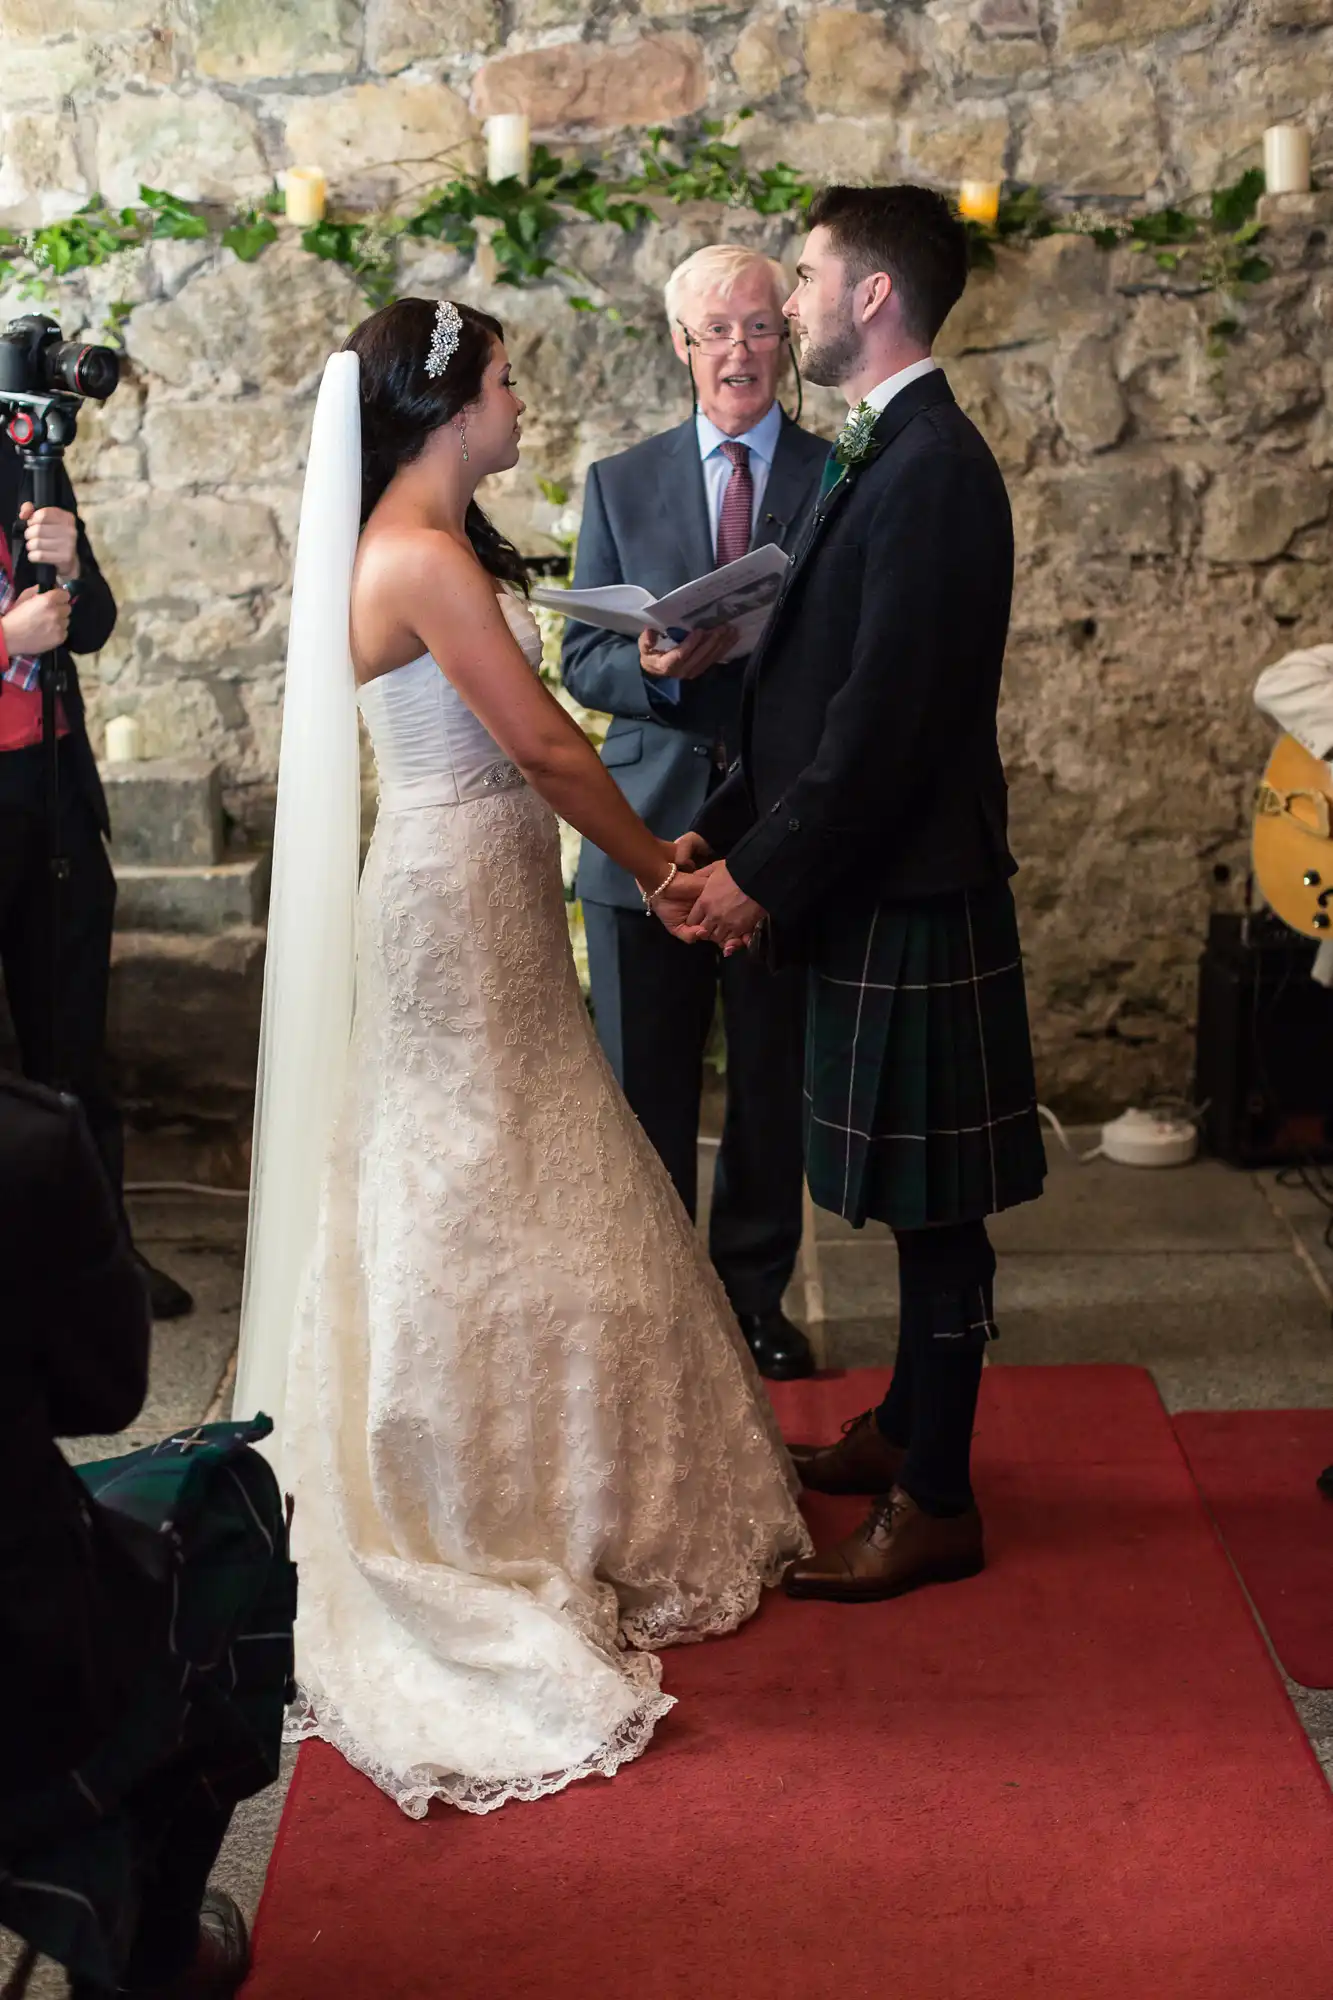 Bride in a lace gown and groom in a kilt holding hands during a wedding ceremony, with an officiant speaking and a photographer capturing the moment.